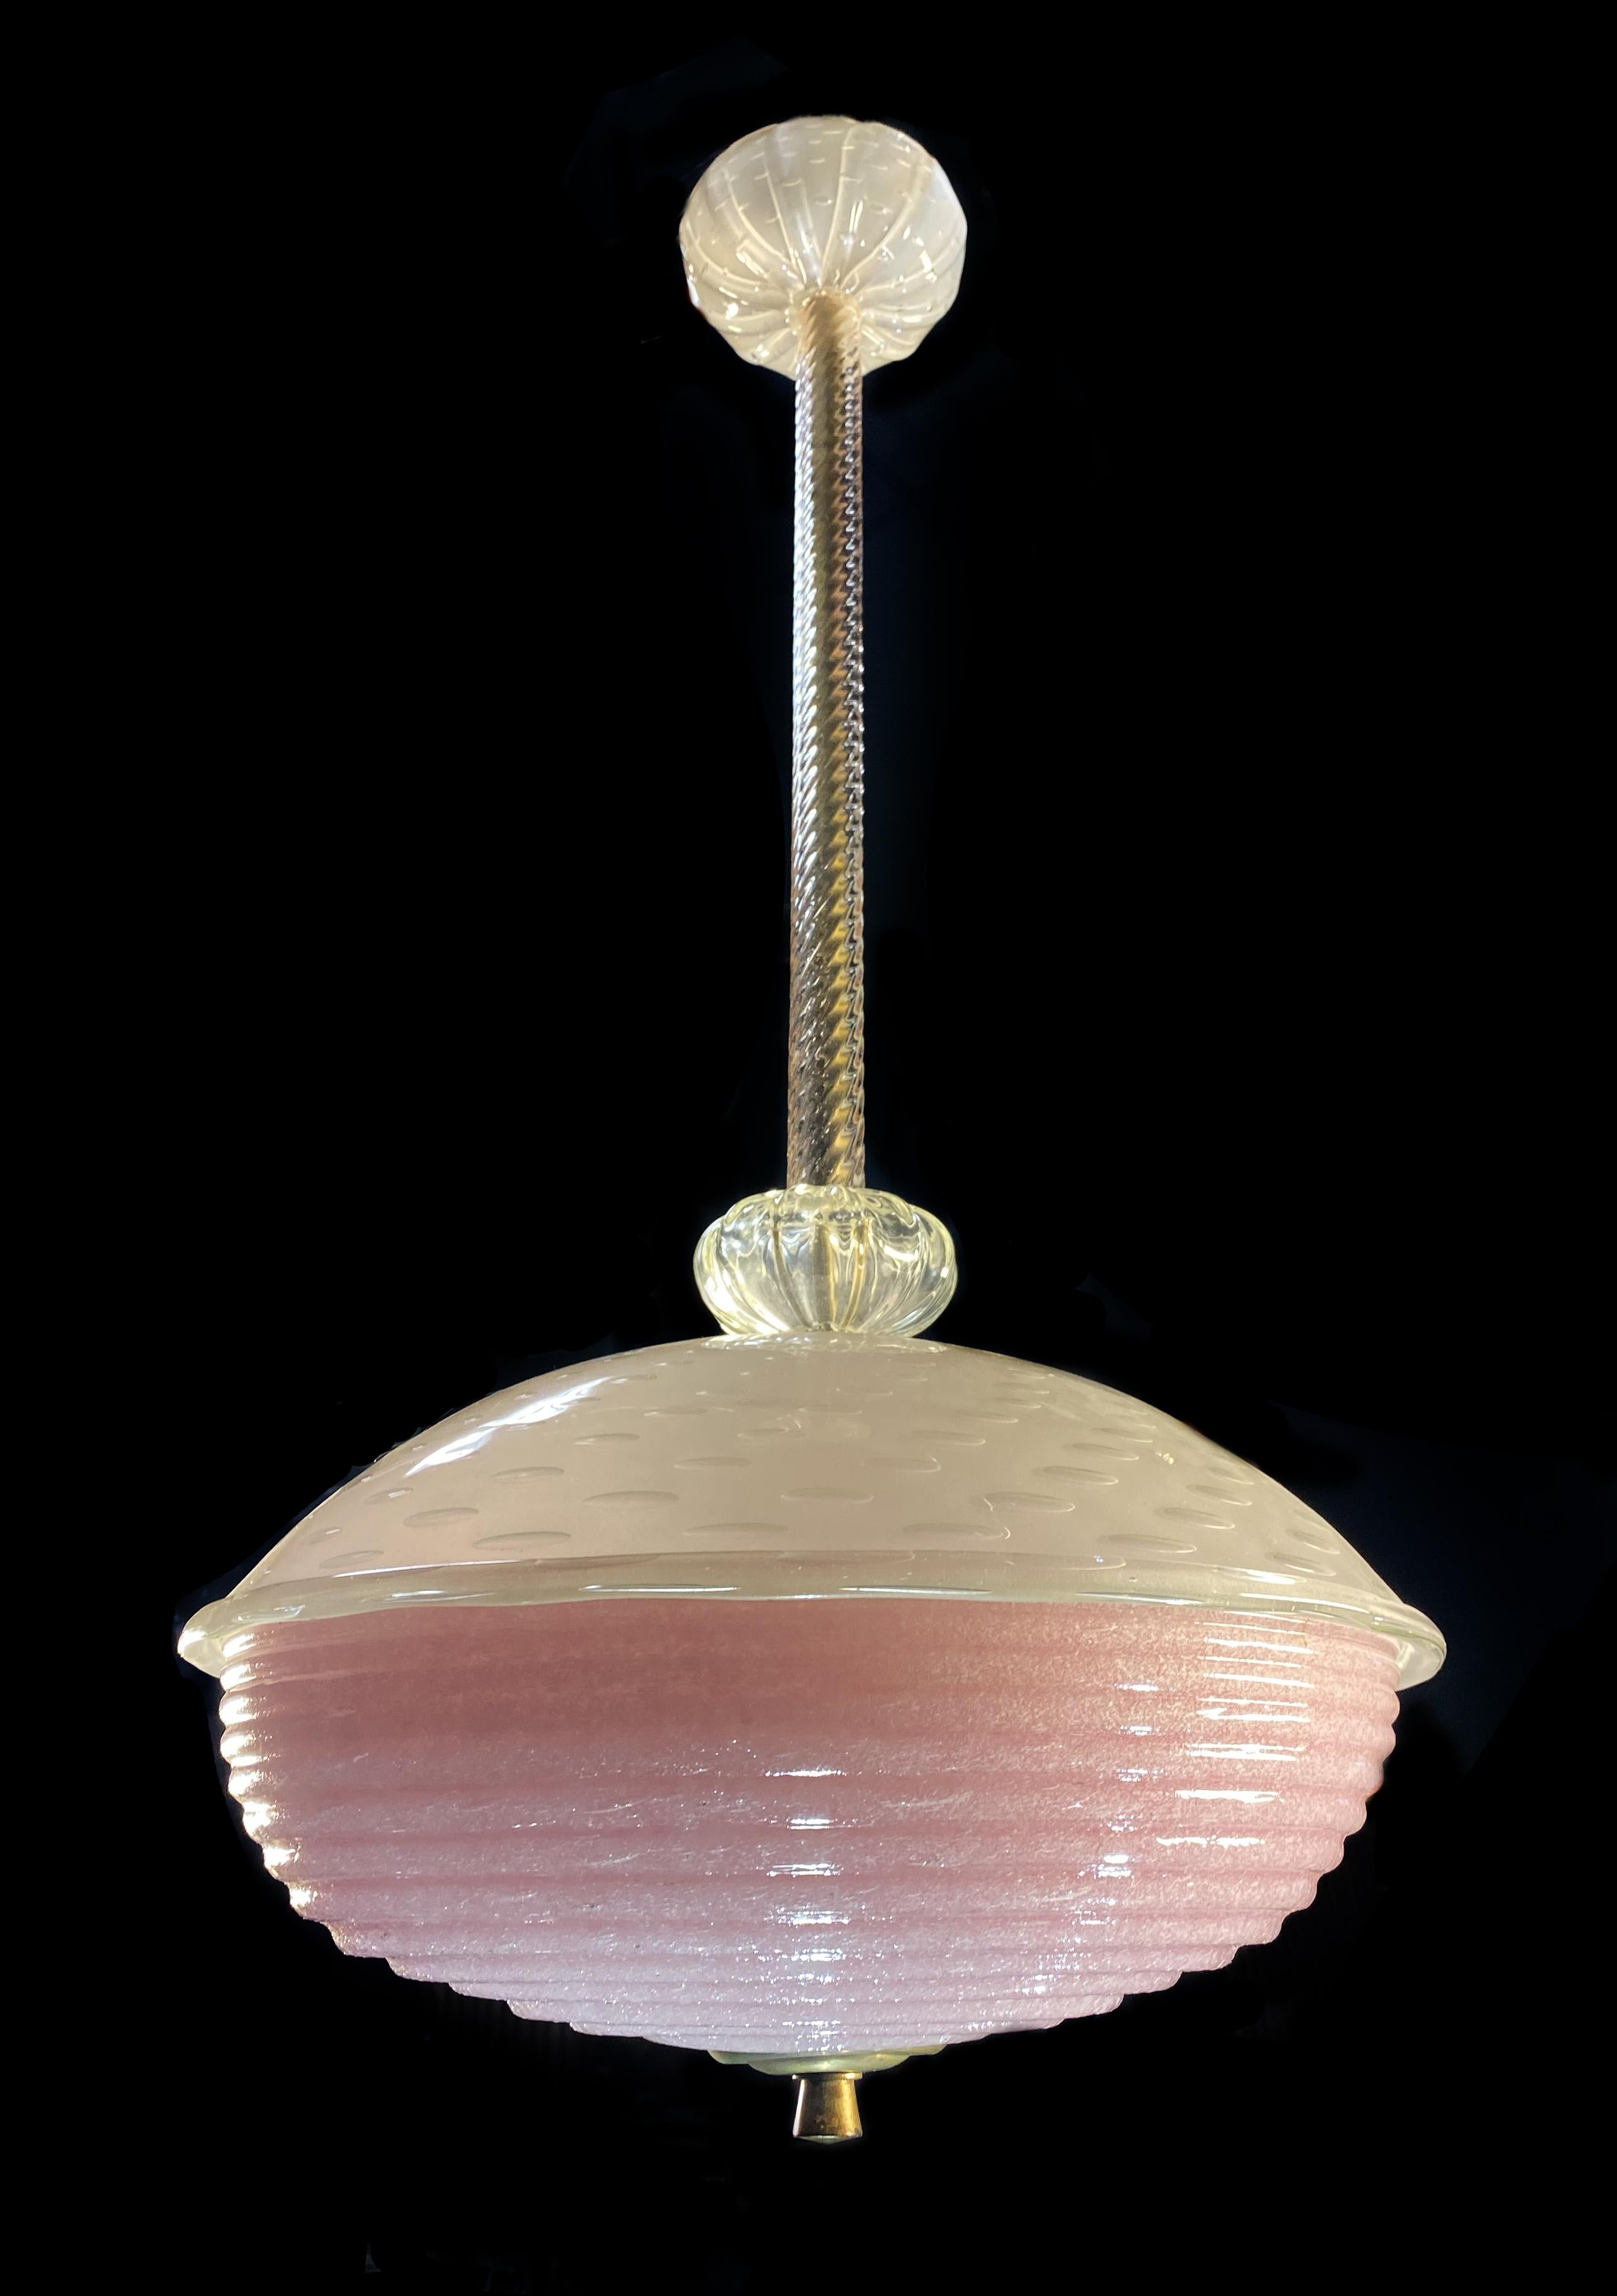 Charming Pink Glass Lantern Chandelier by Barovier & Toso, Murano, 1940 For Sale 12